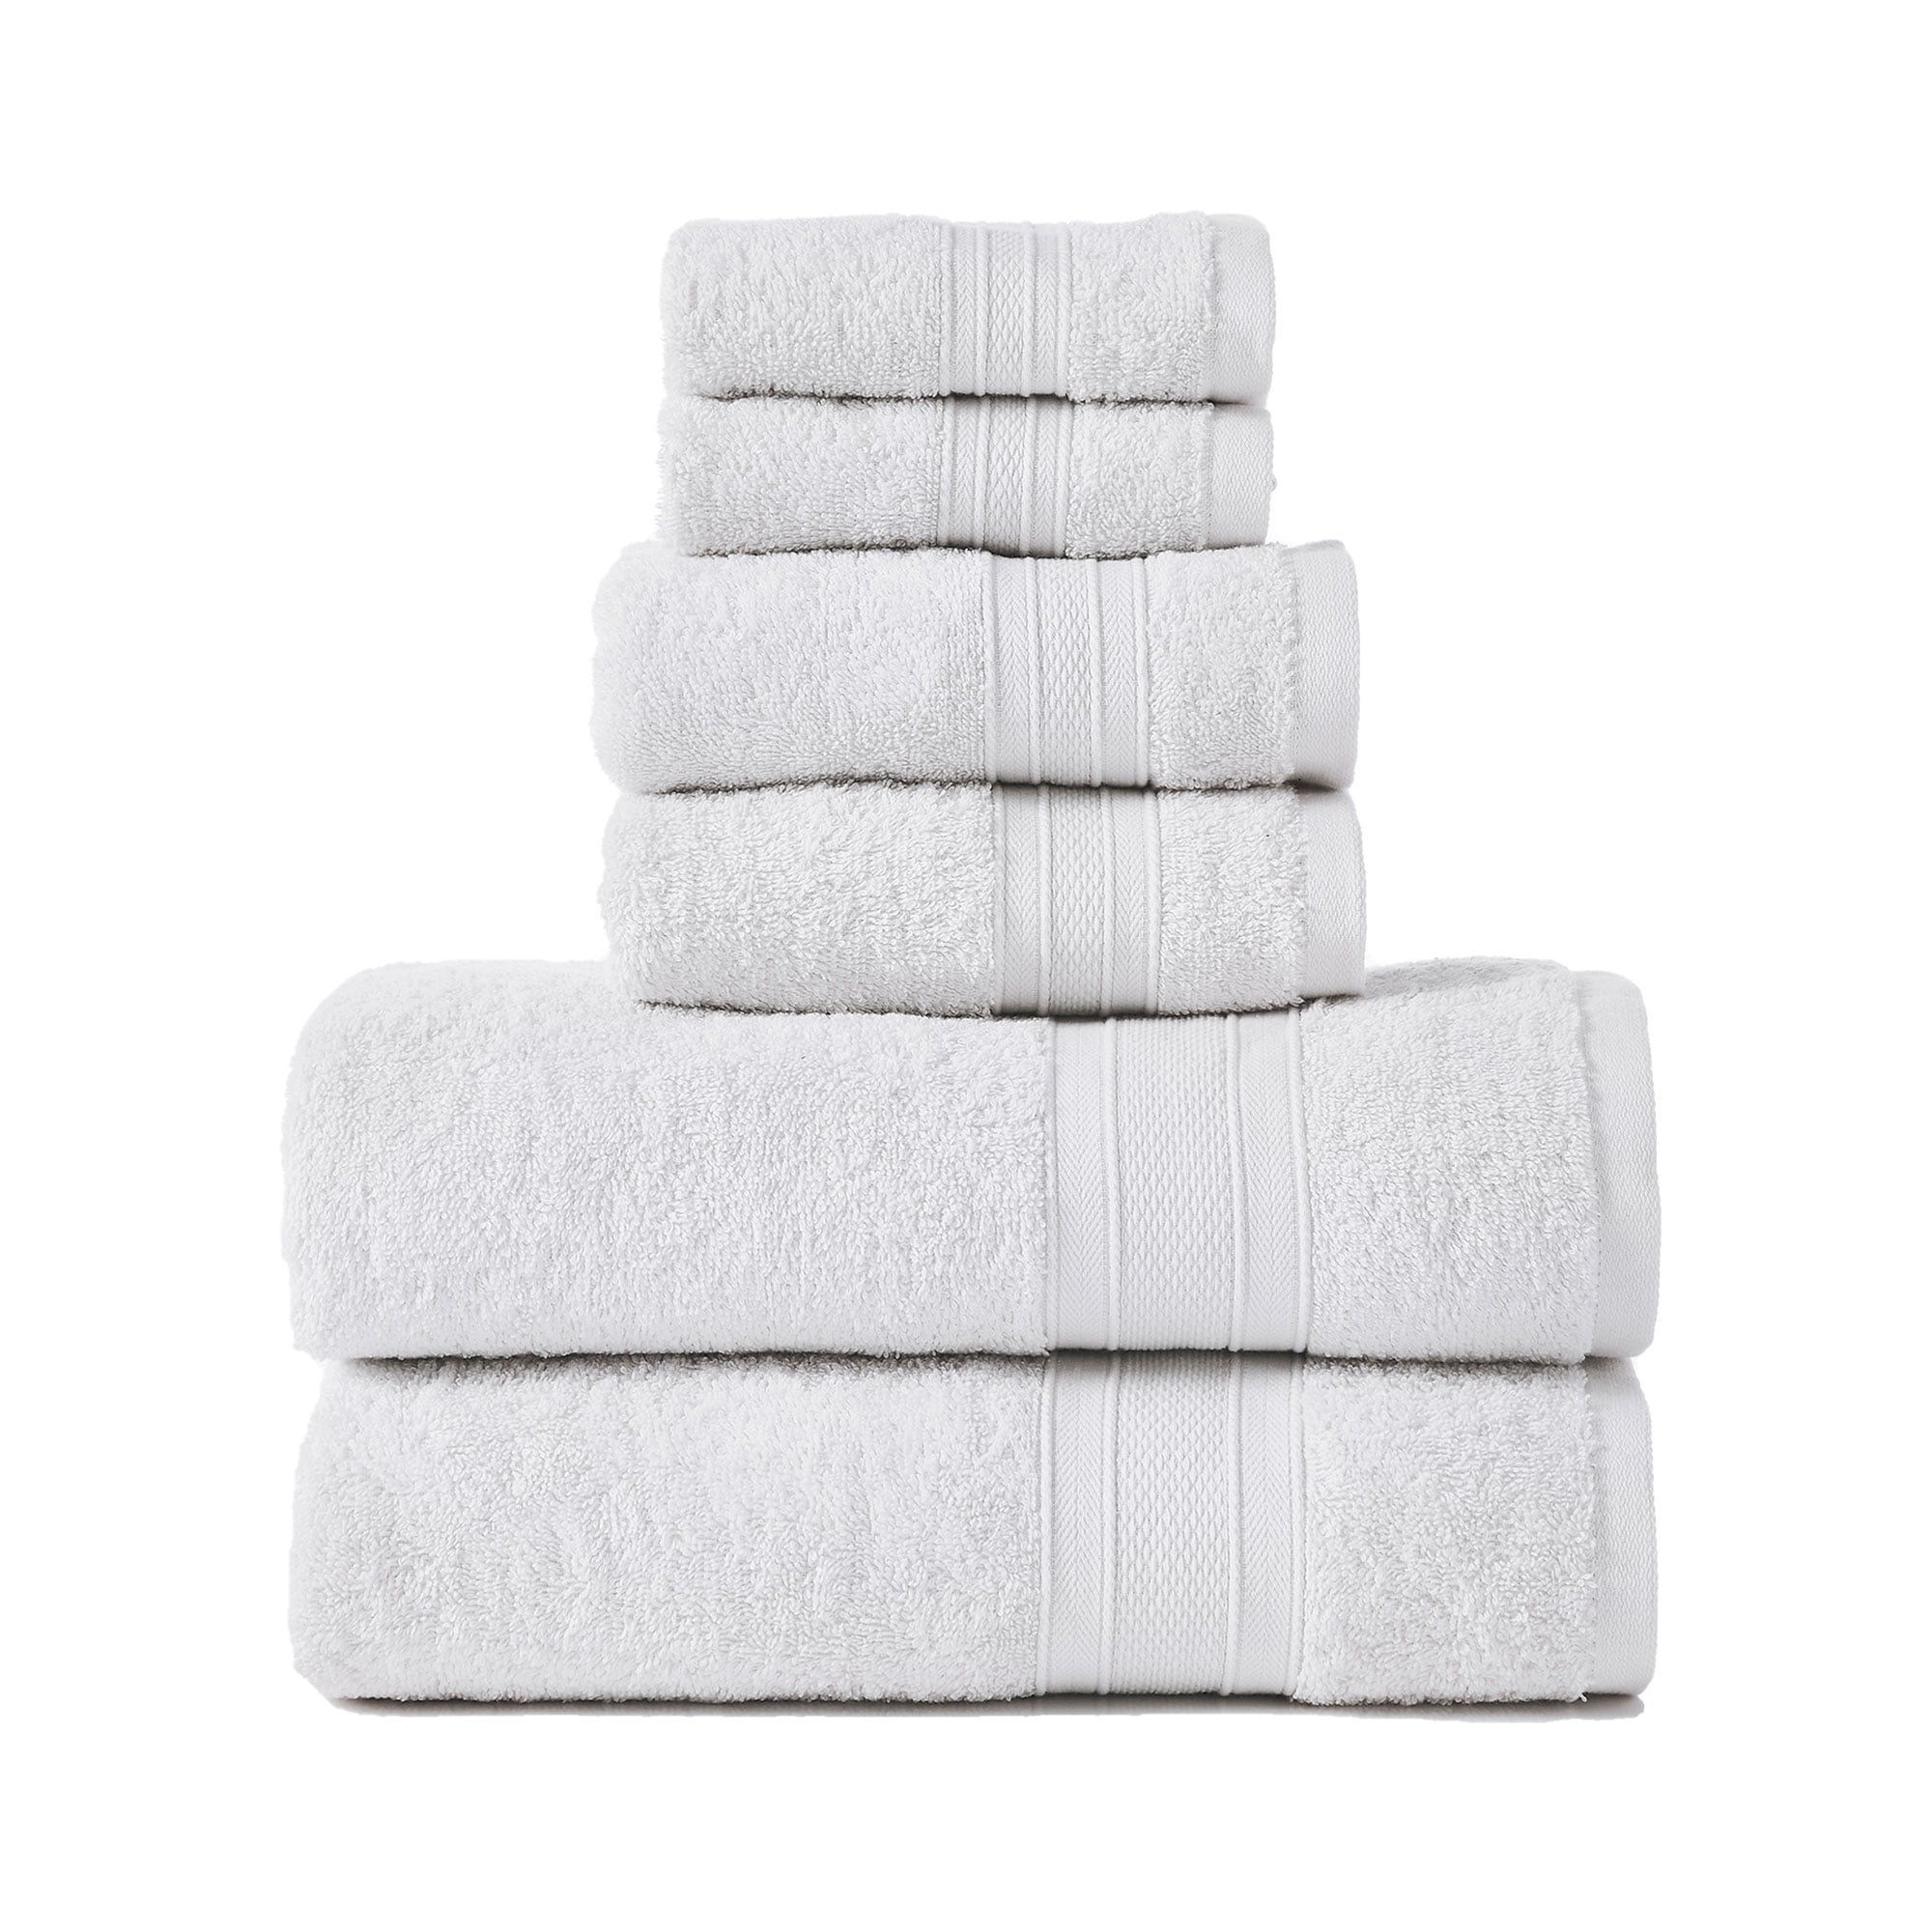 Quick Dry And Absorbent Makeup remover White` 12 Pack Cotton Washcloths Set 100% Egyptian Cotton Face Cloths Towels Flannels 30 x 30 cm 